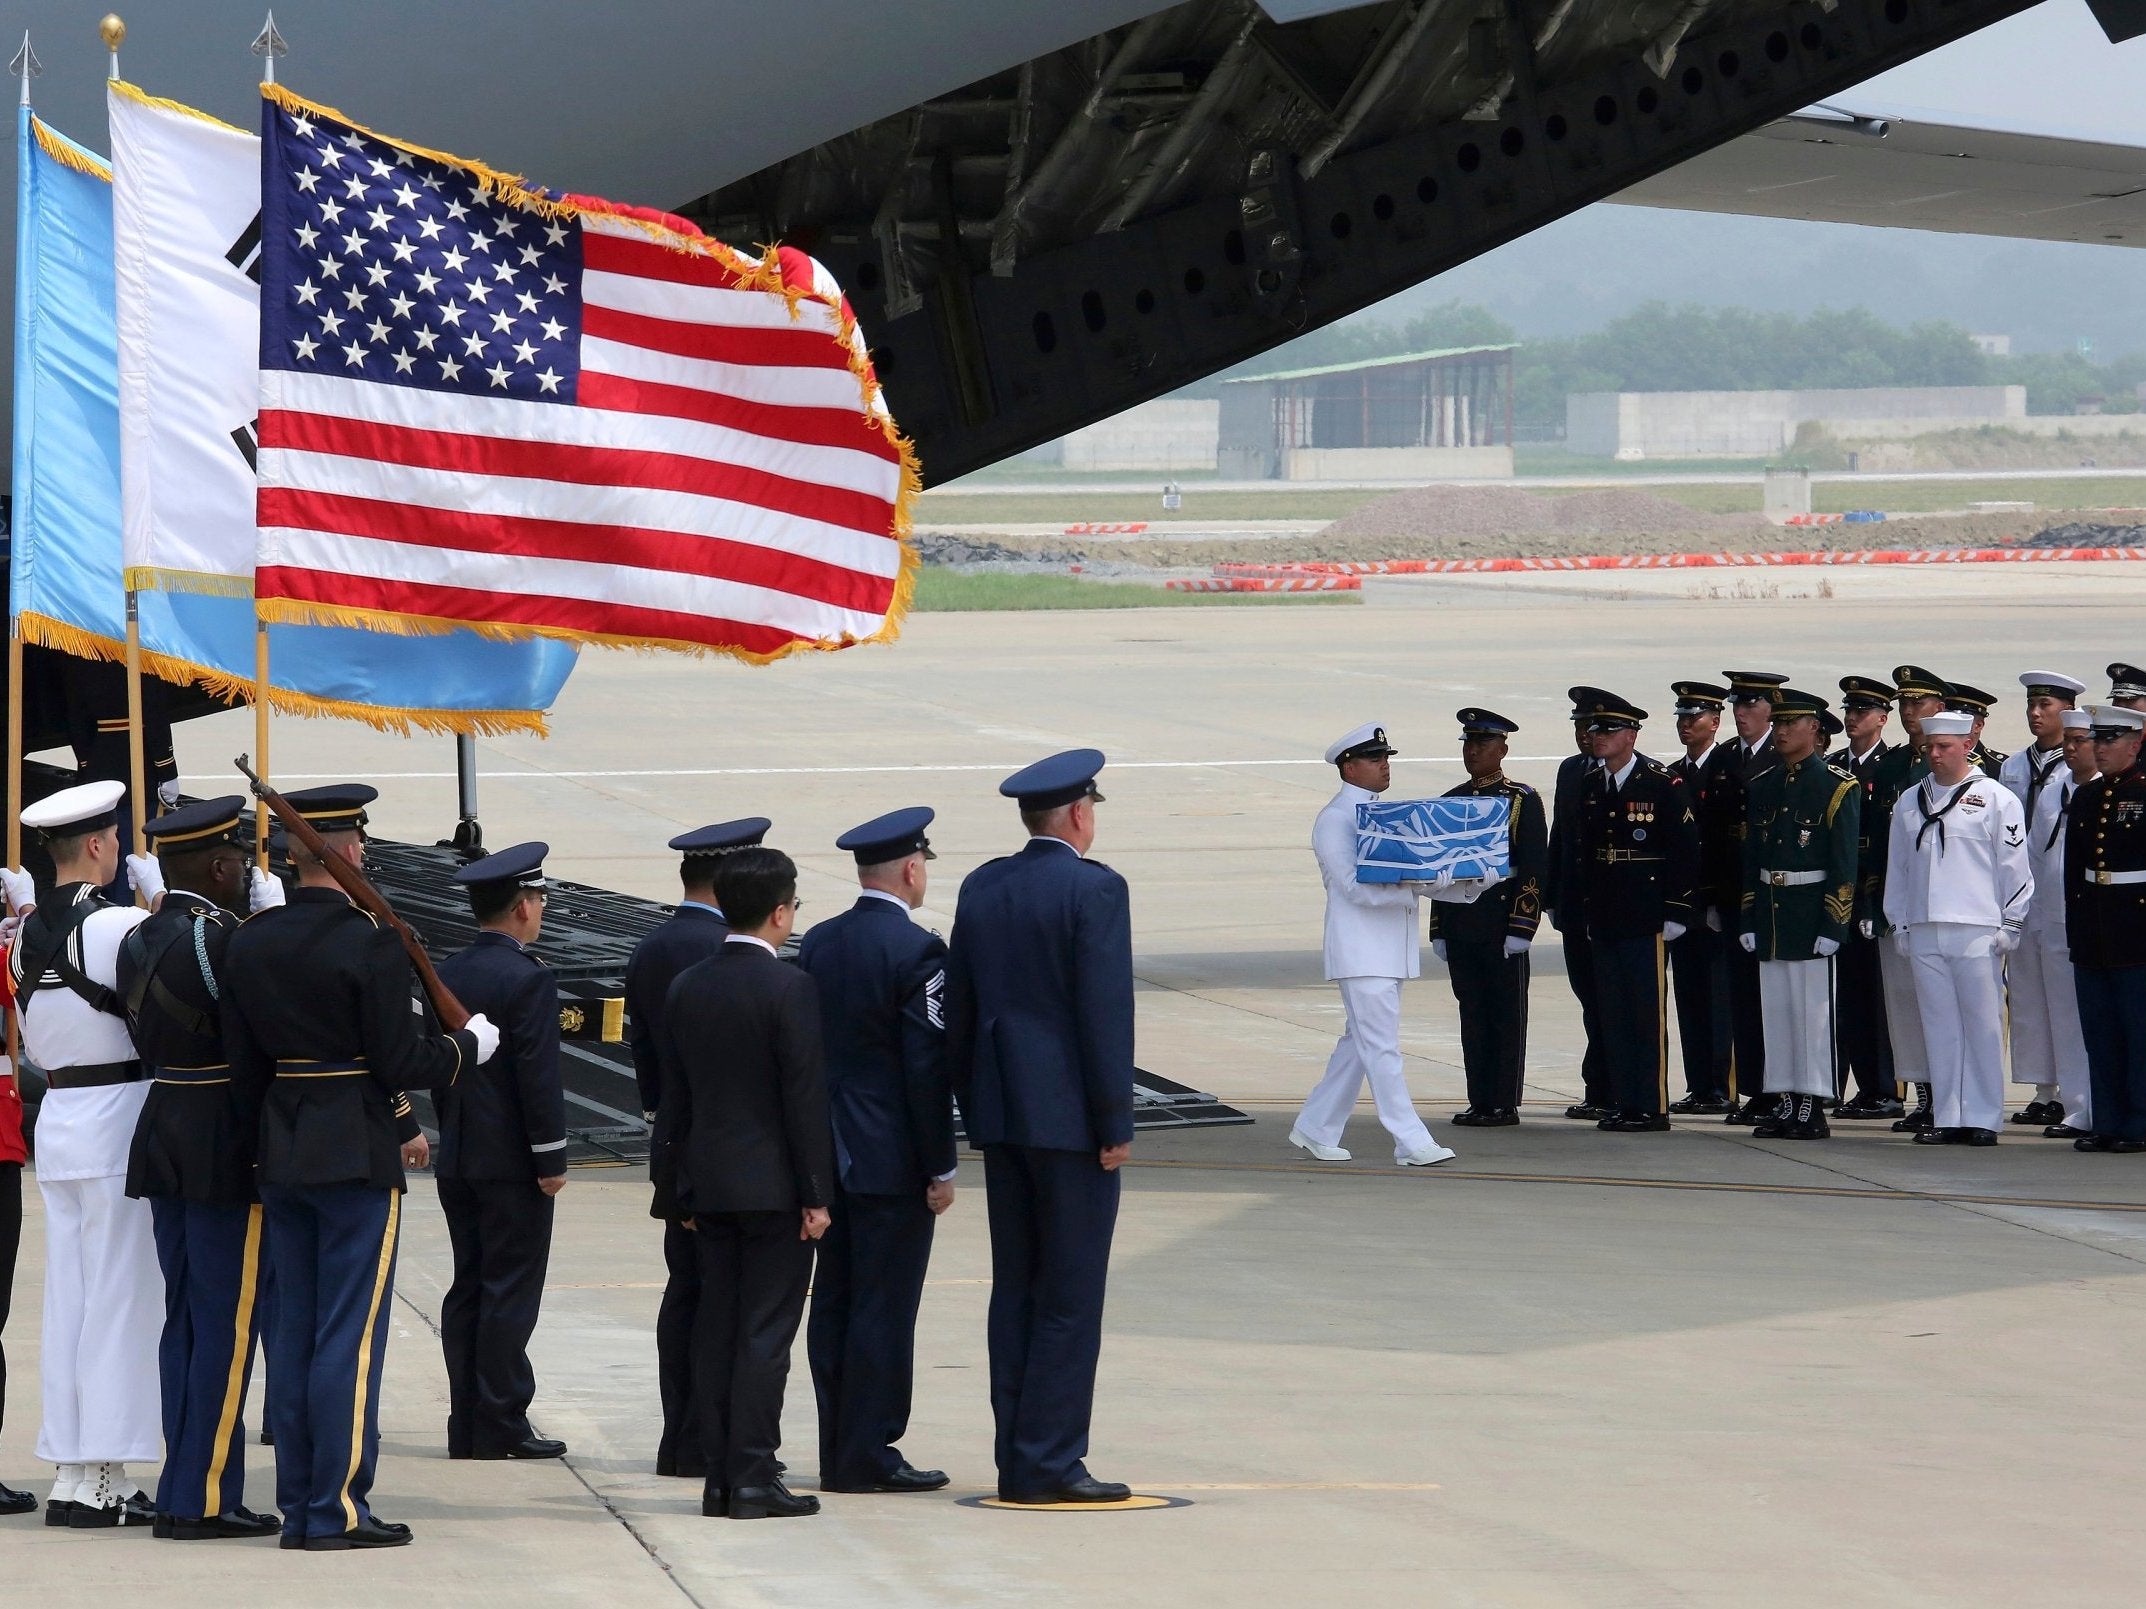 A UN honour guard at Osan air base in Pyeongtaek carries a casket containing remains believed to be from American servicemen killed during the 1950-53 Korean War after arriving from North Korea